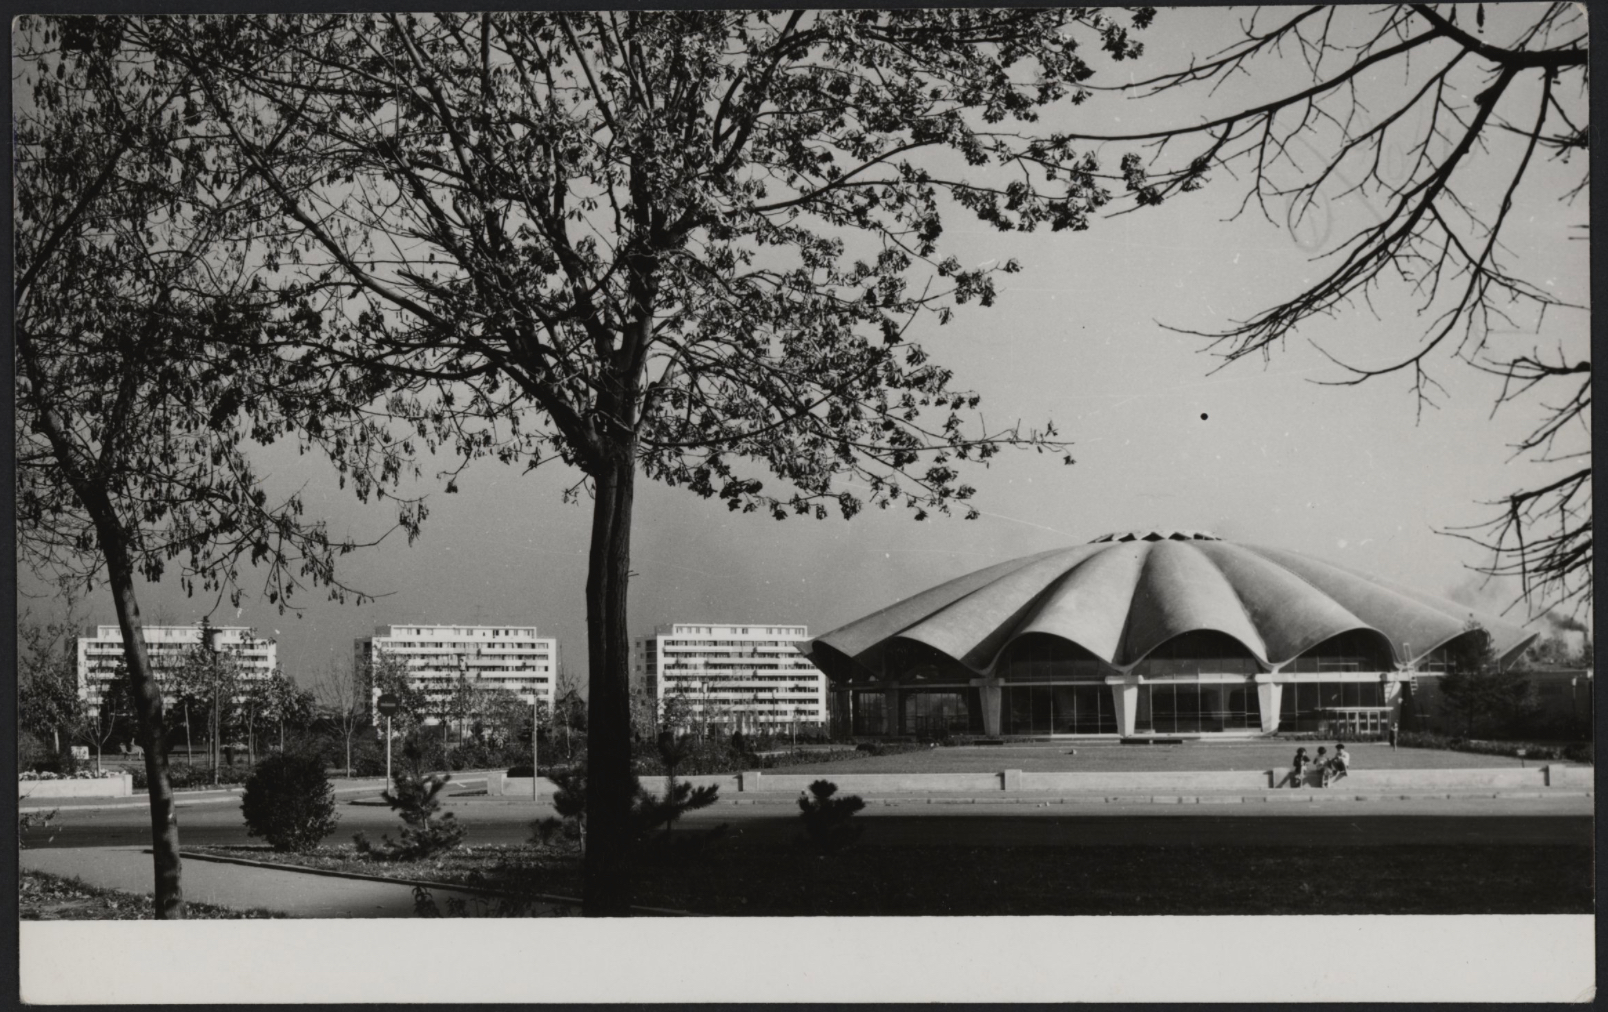 The State Circus in Bucharest, 1961-70